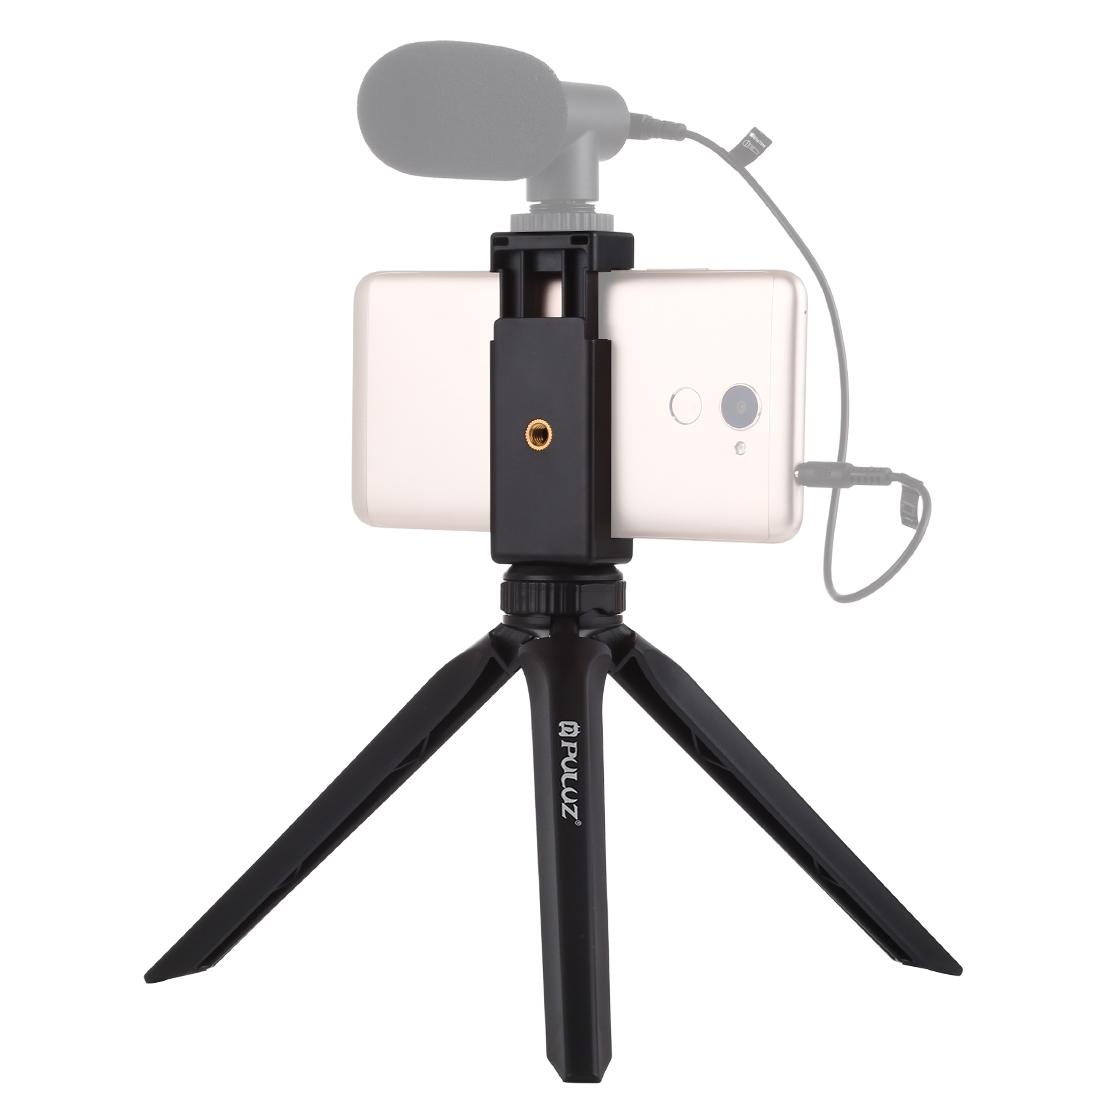 PULUZ Pocket Mini Plastic Tripod Mount with Phone Clamp Holder for Phone Sumsung Huawei Xiaomi Iphone